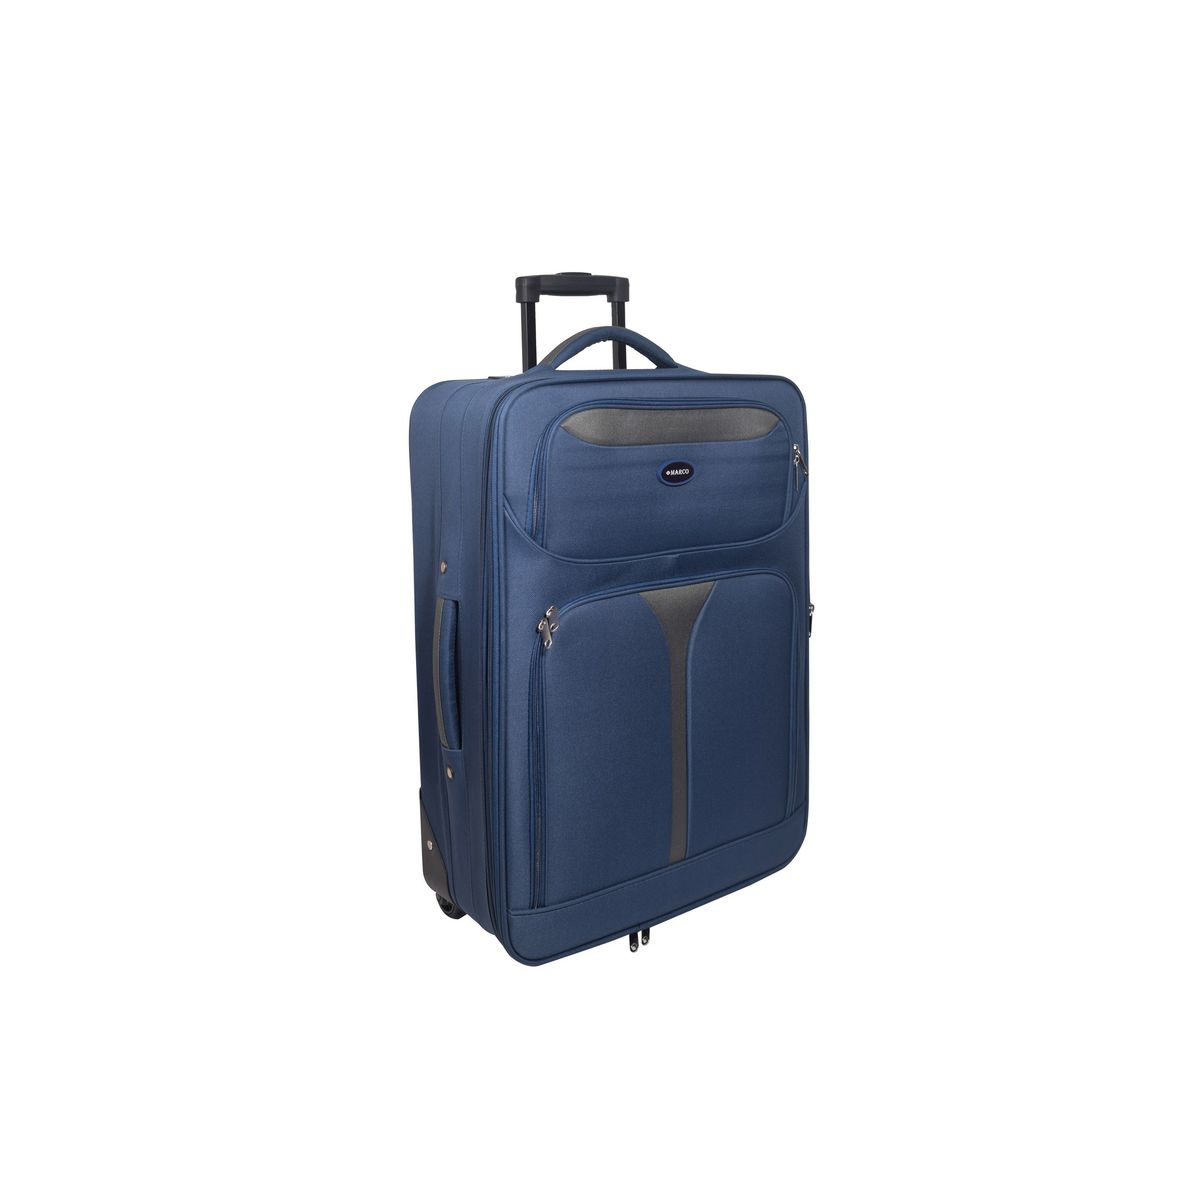 Marco Soft Case Luggage Suitcase Bag - 20 inch - Blue-Grey